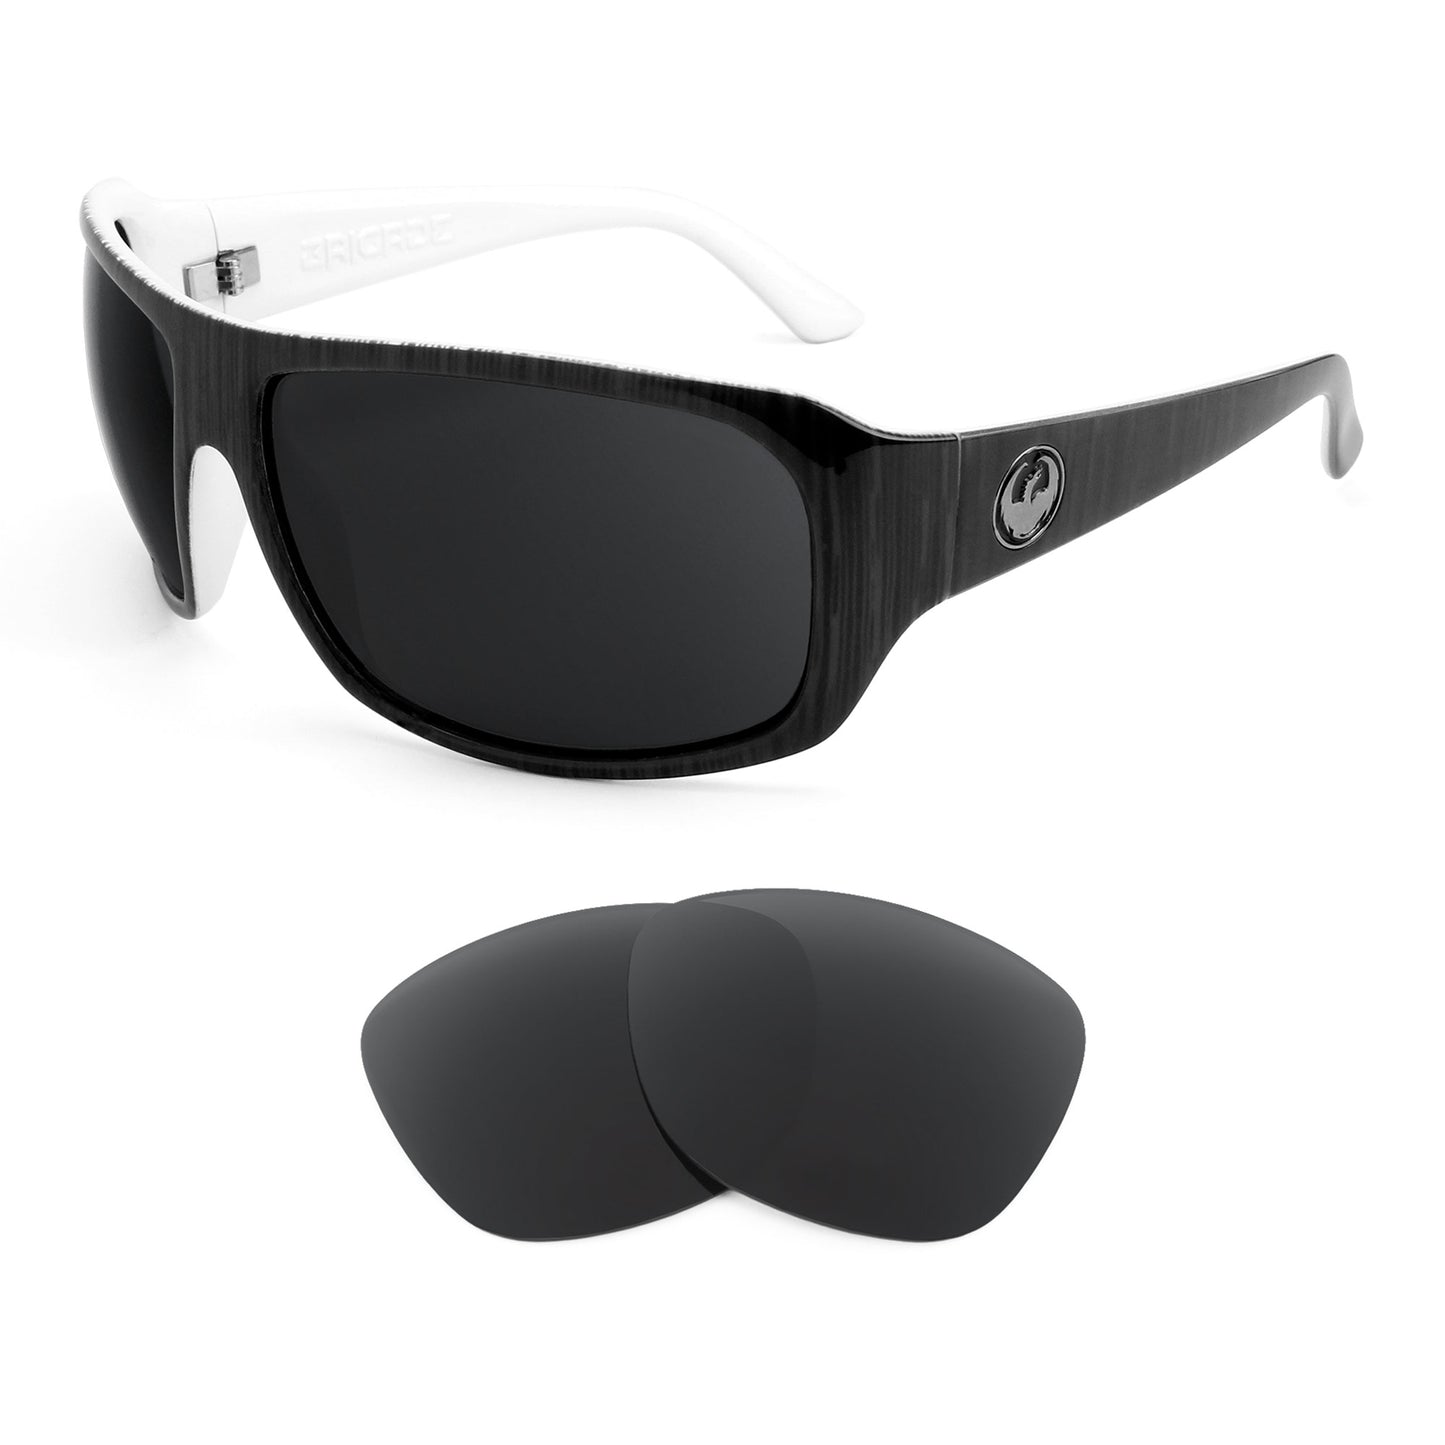 Dragon Brigade sunglasses with replacement lenses